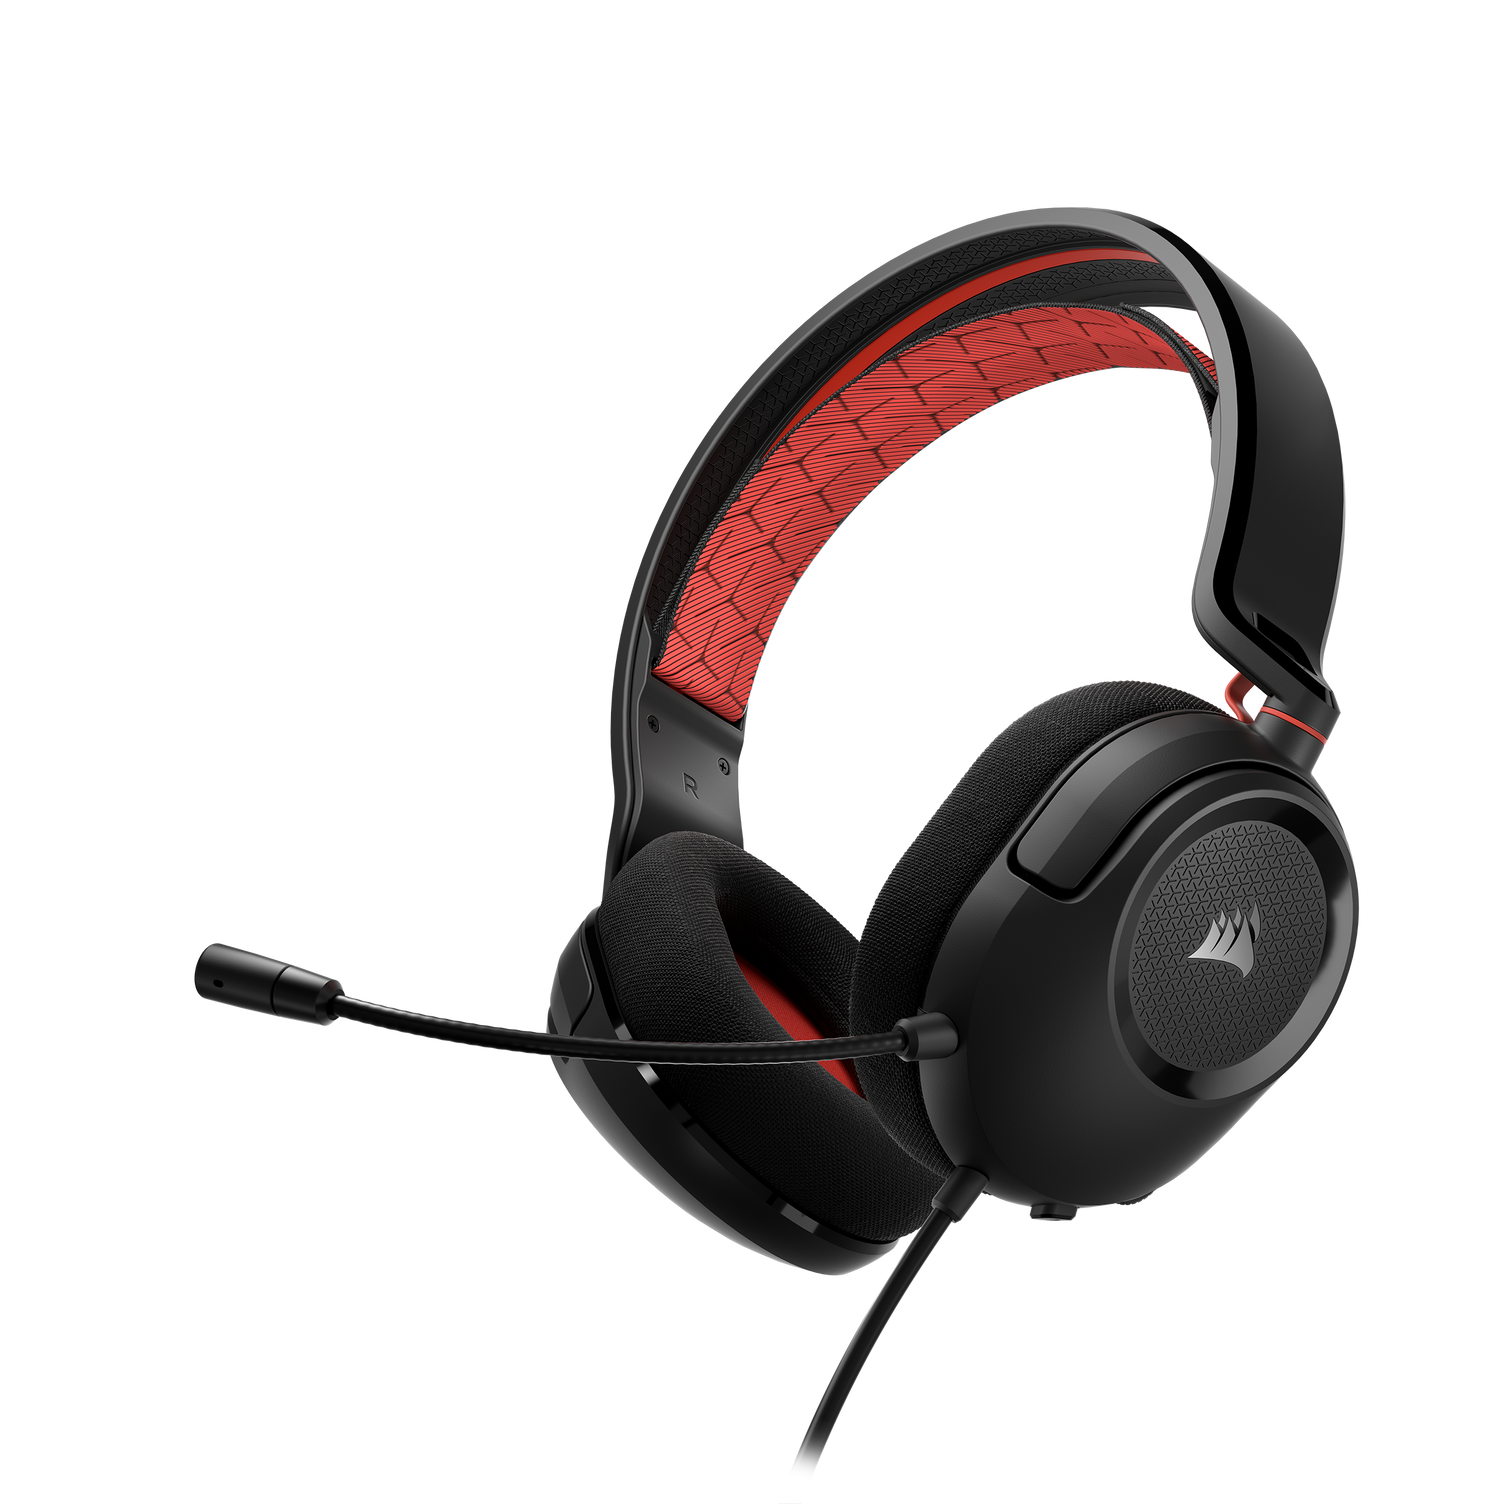 The new CORSAIR HS35 v2 gaming headset series has been revealed